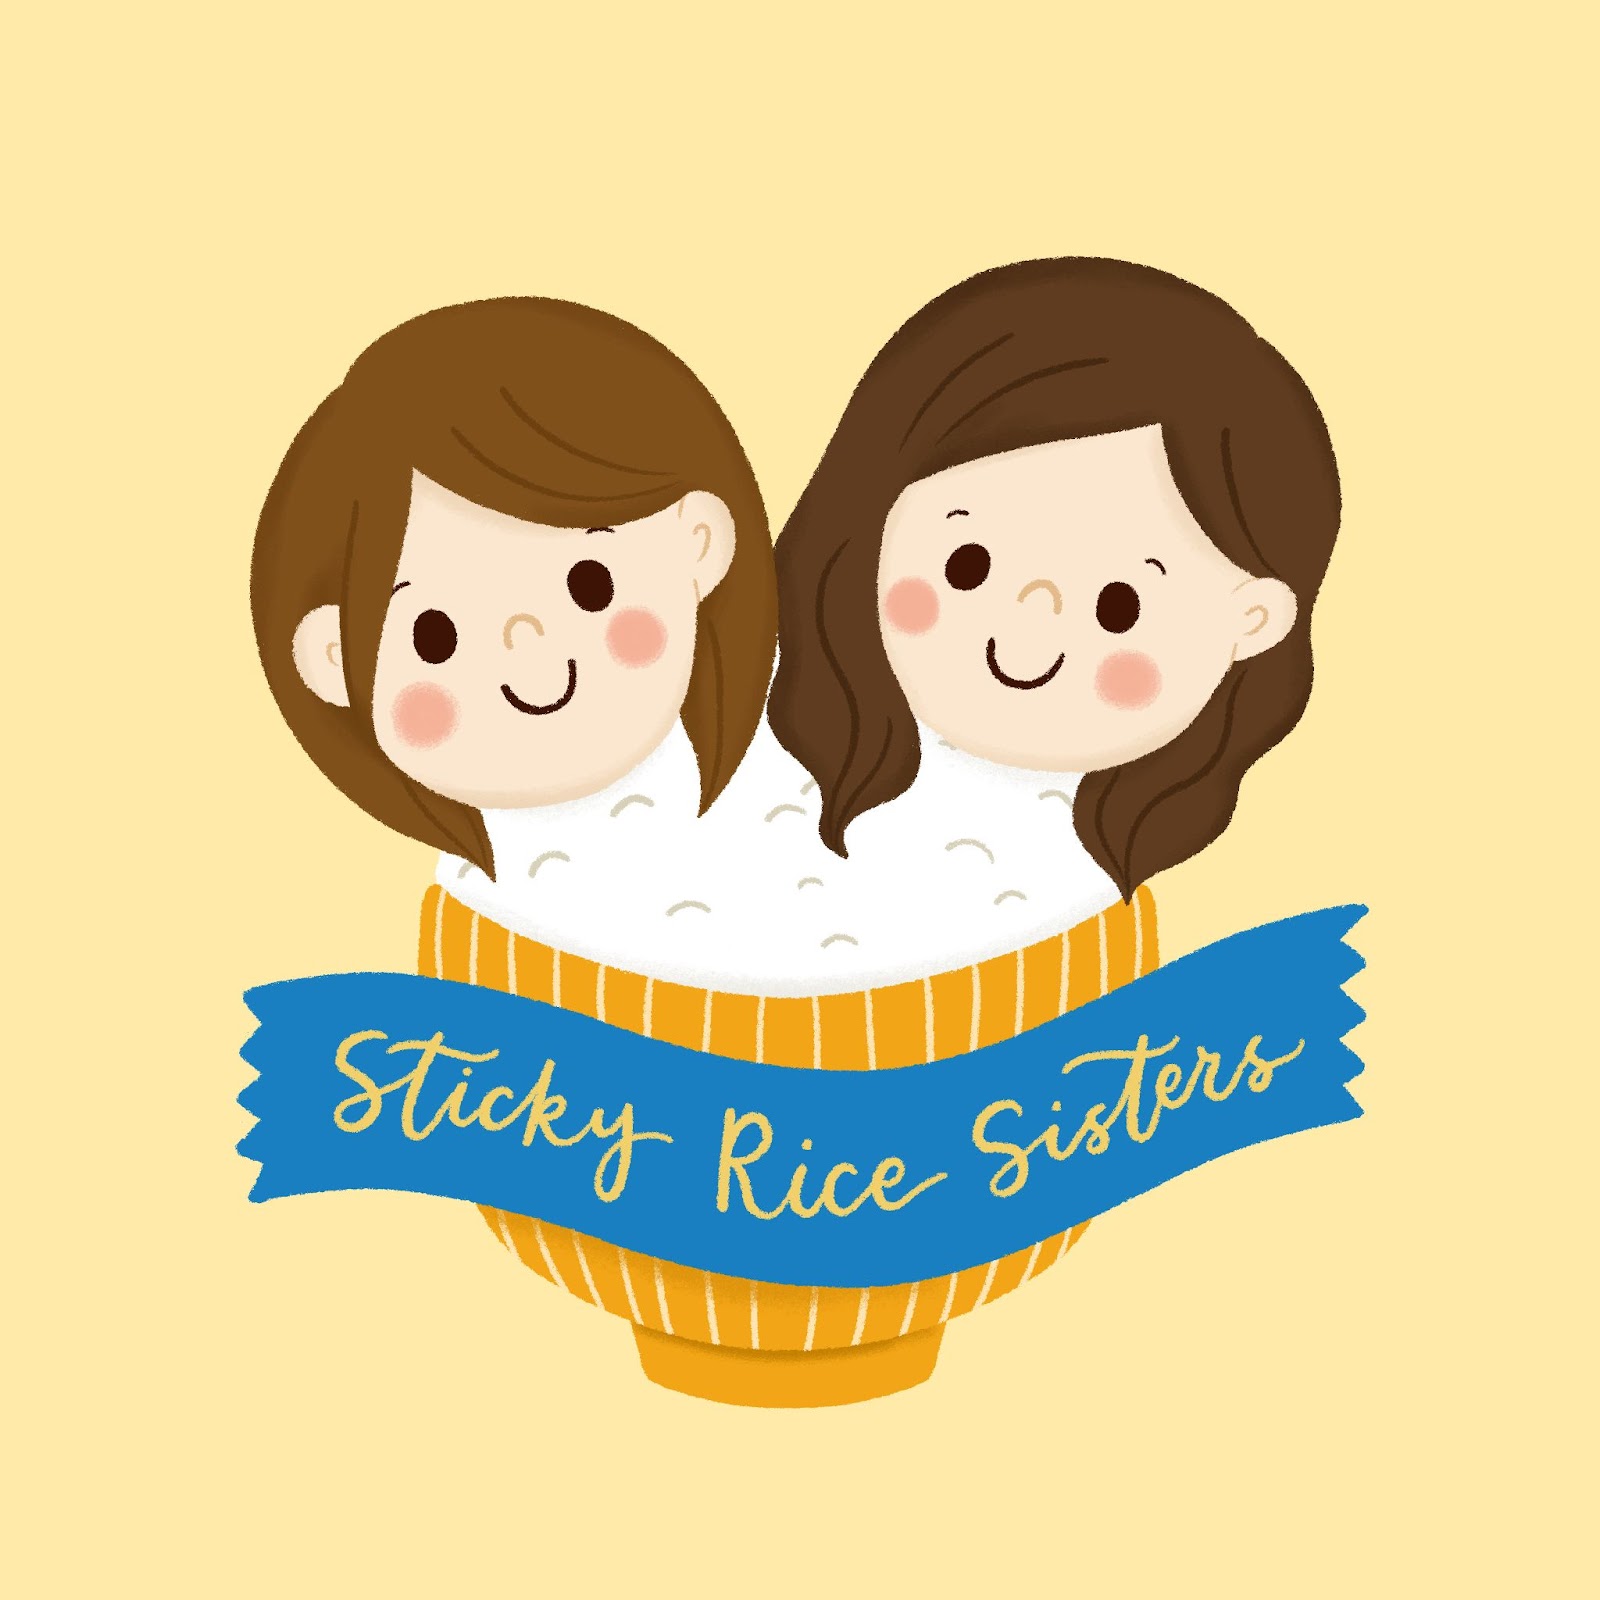 SmileABCs Sticky Rice Sisters – The image shows the Sticky Rice Sisters logo, a yellow background with a cartoon image of two sisters' heads in a bowl of sticky rice with a blue 